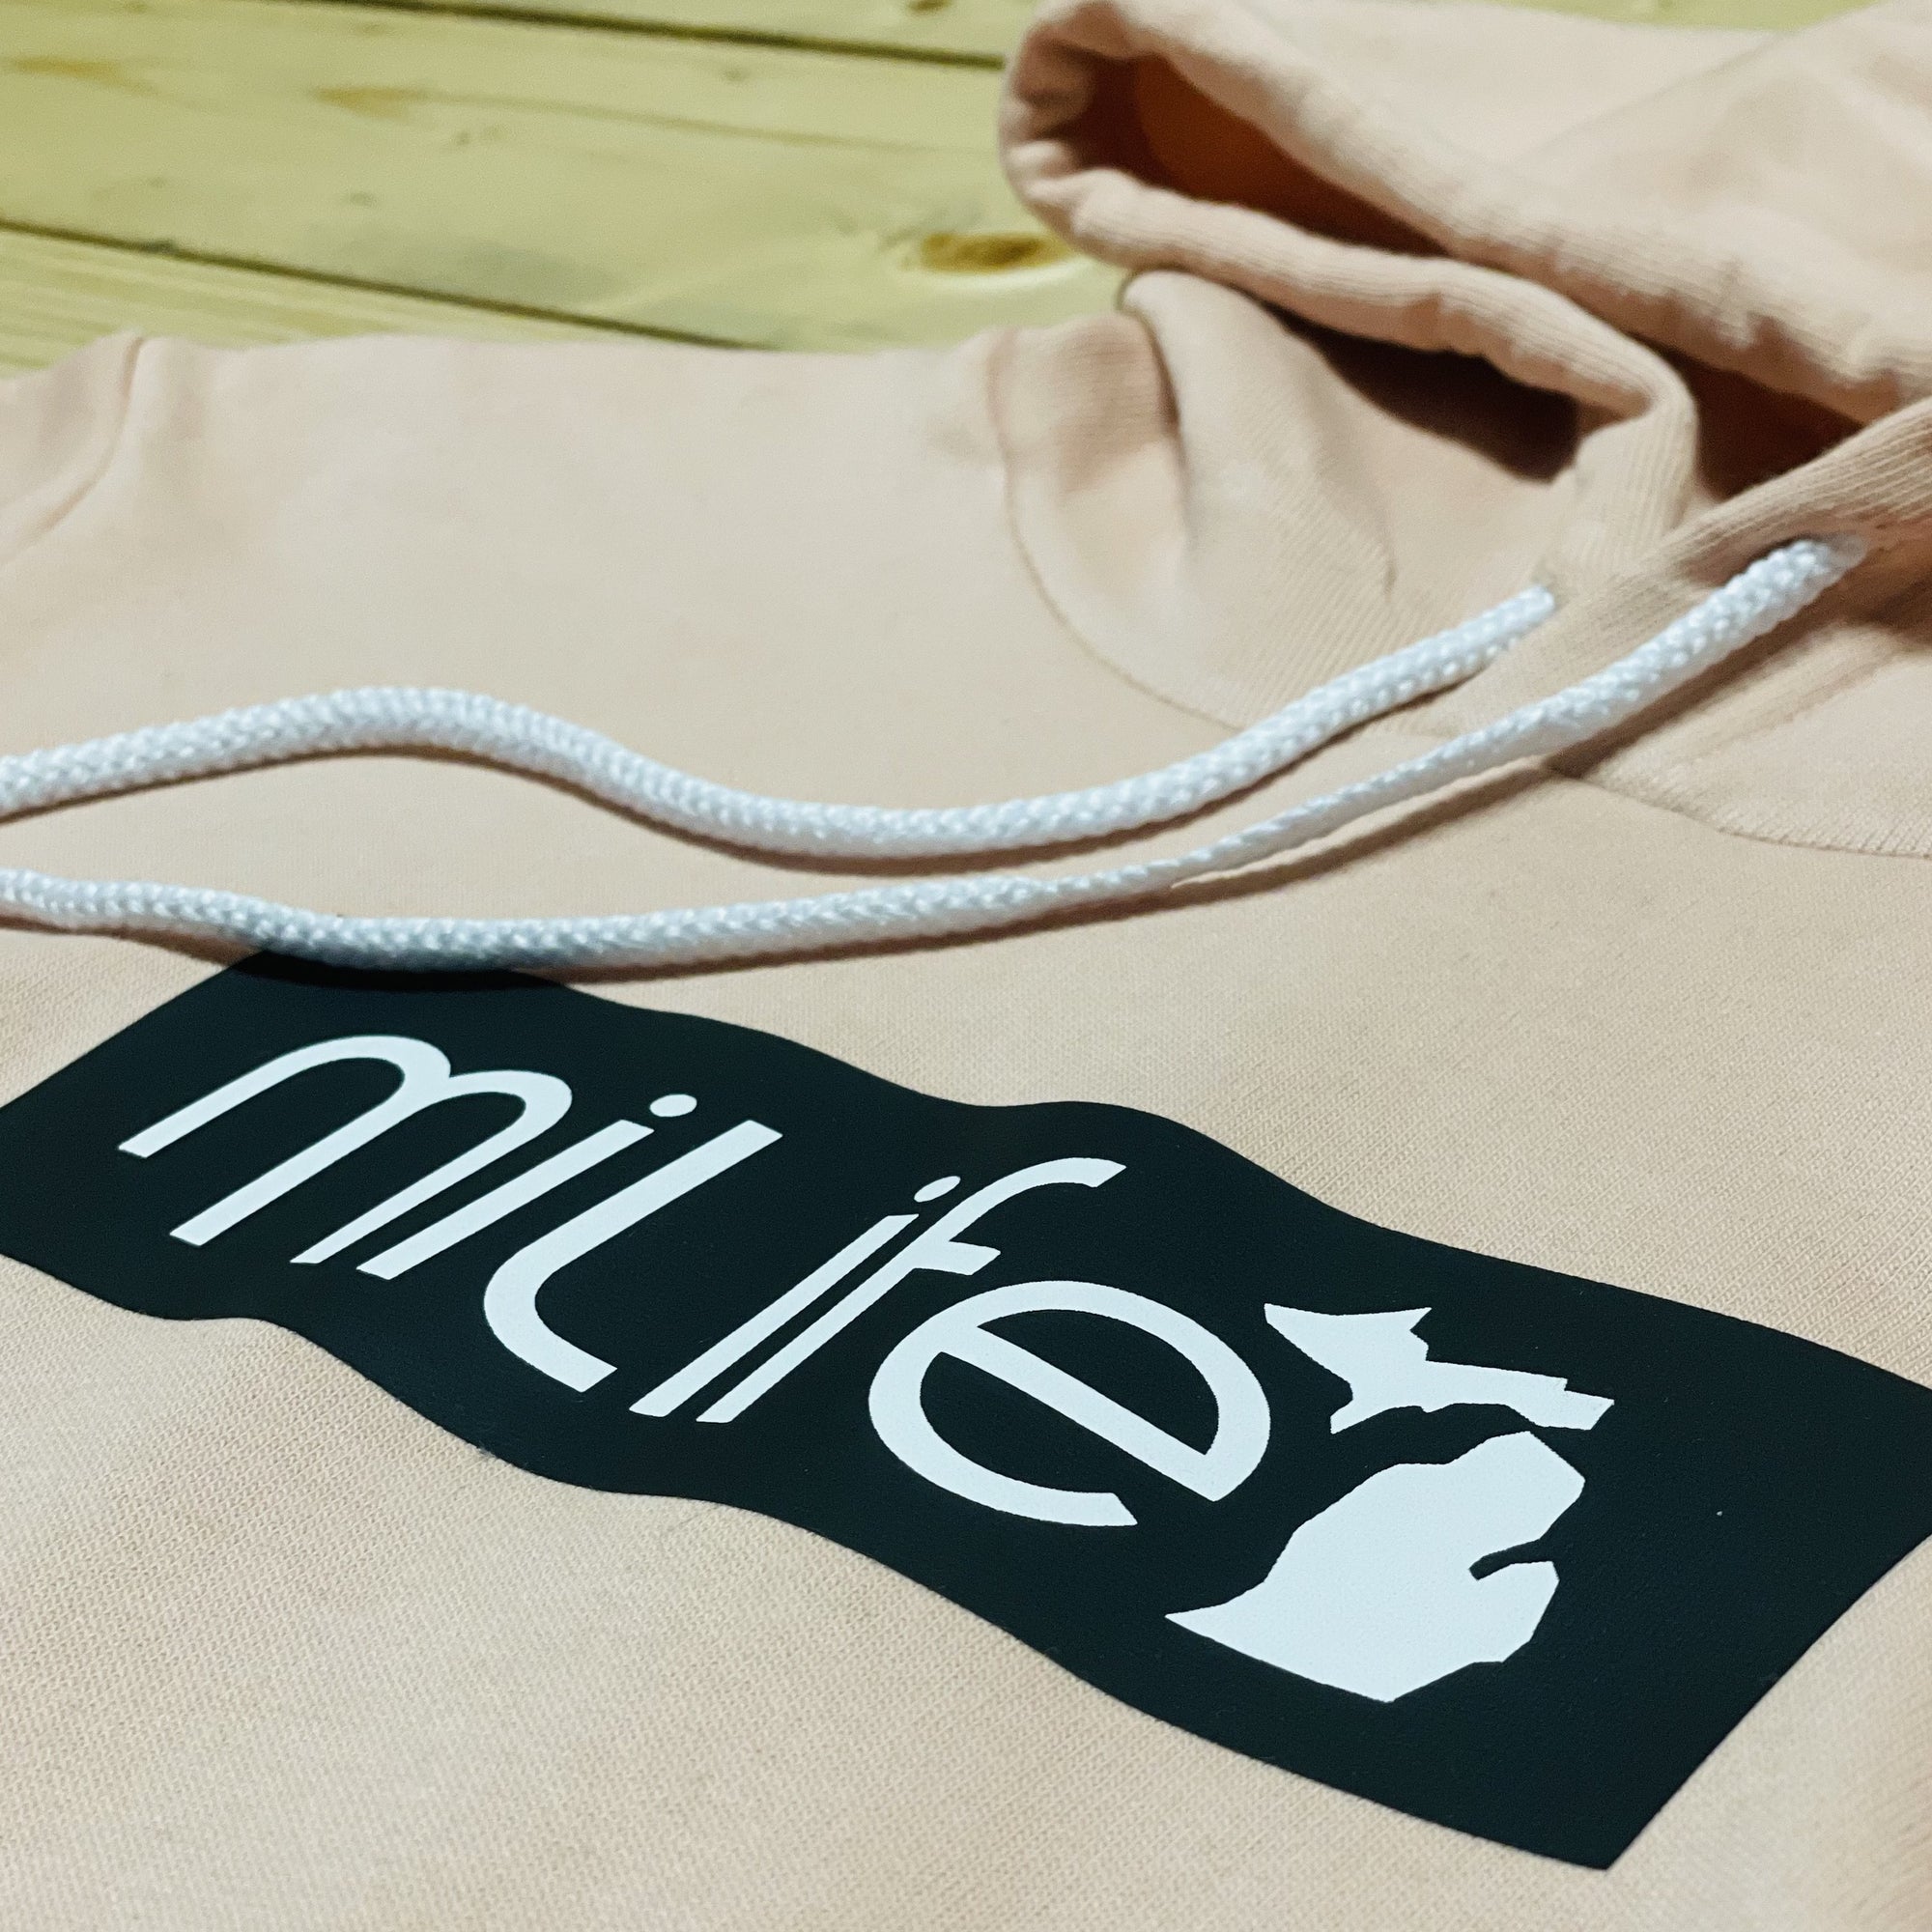 Milife comfy fleece hoodies are great for any michigan occasion. whether you're in grand rapids, traverse dirt, Detroit, ann arbor, or Lansing, our clothing is perfect for your michigan day.